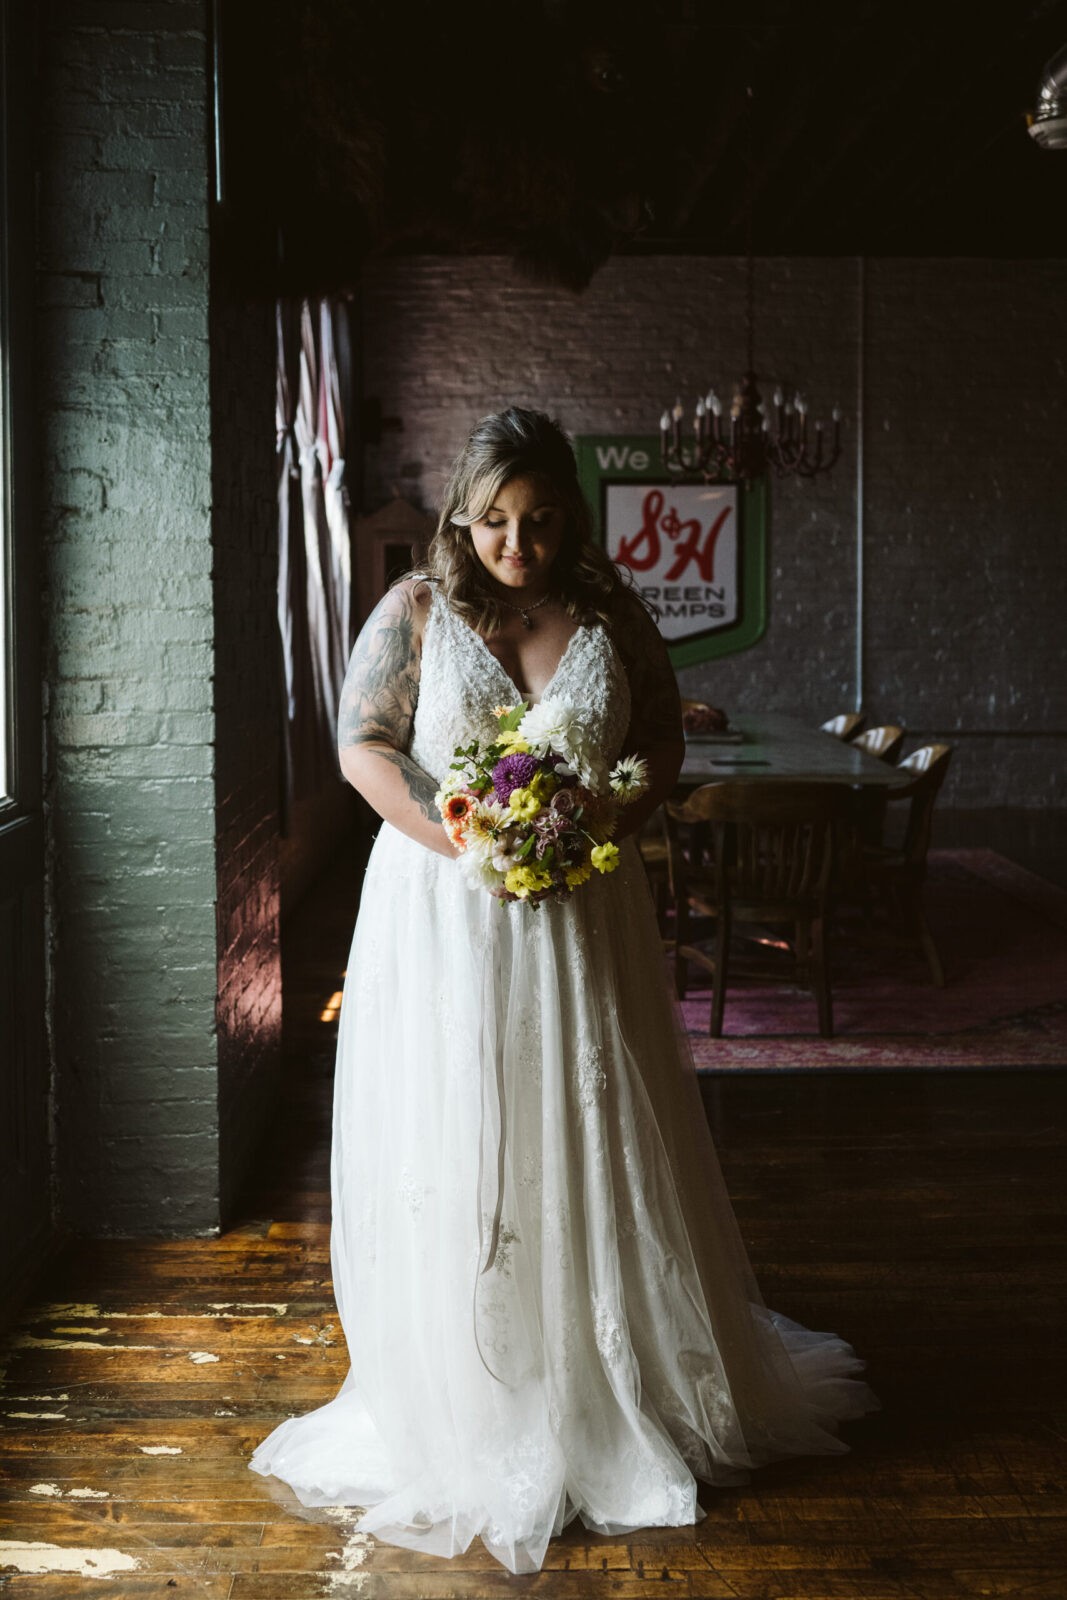 Dramatic portrait of a bride on her wedding day